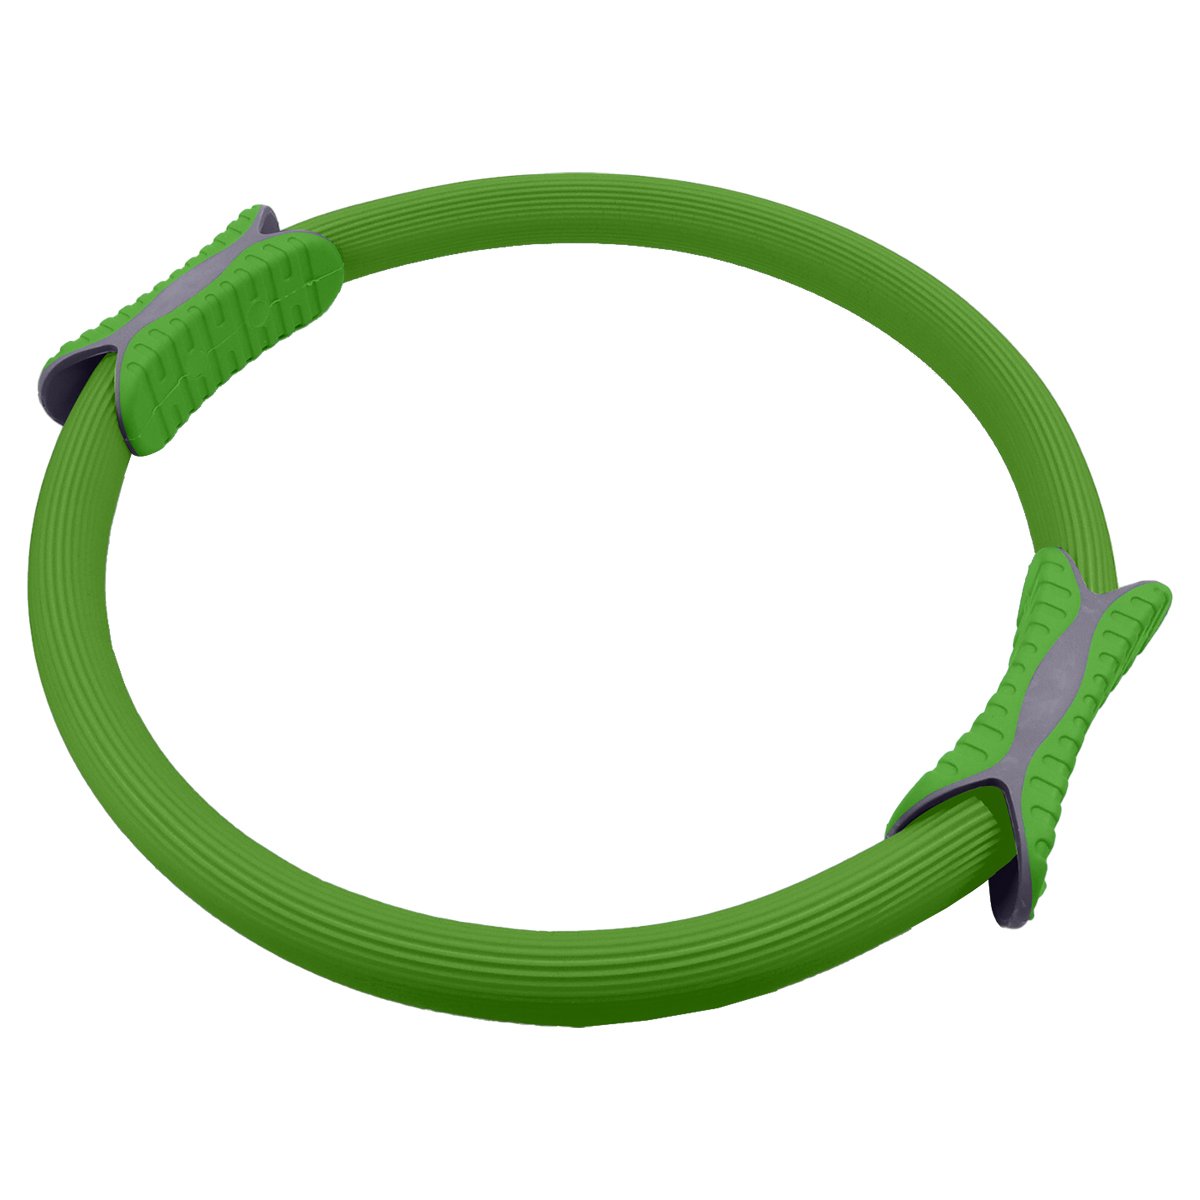 Powertrain Pilates Ring Band Yoga Home Workout Exercise Band Green 2